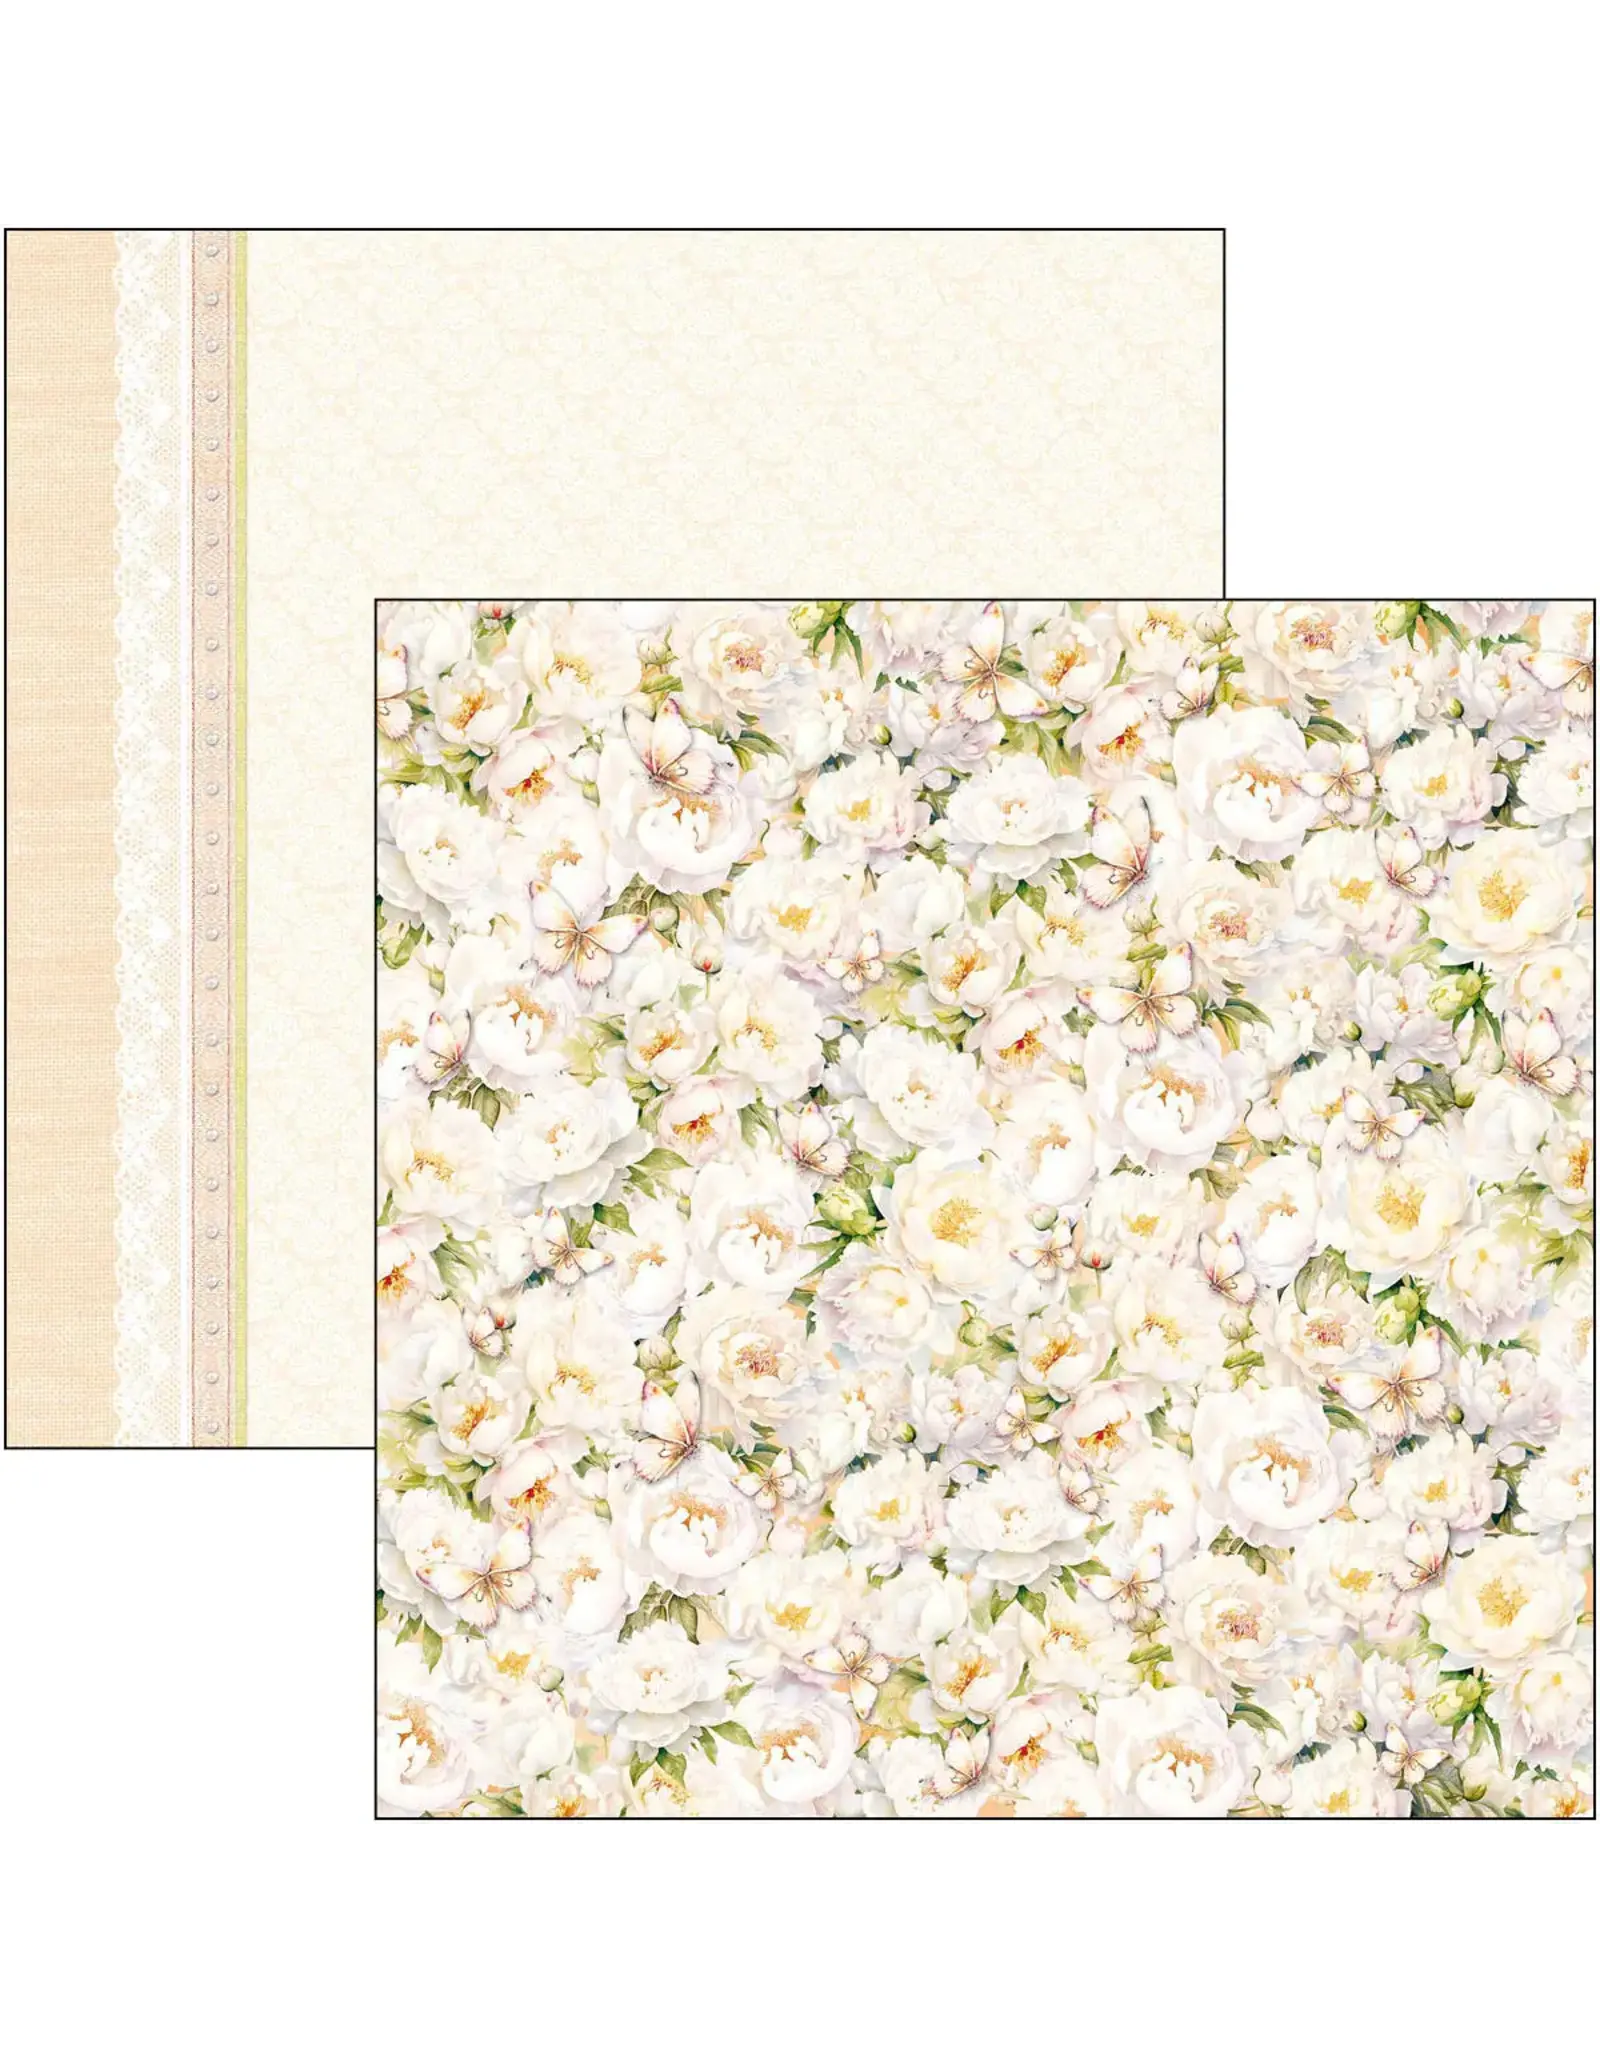 CIAO BELLA CIAO BELLA ALWAYS & FOREVER 12x12 PATTERNS PAD 8 SHEETS